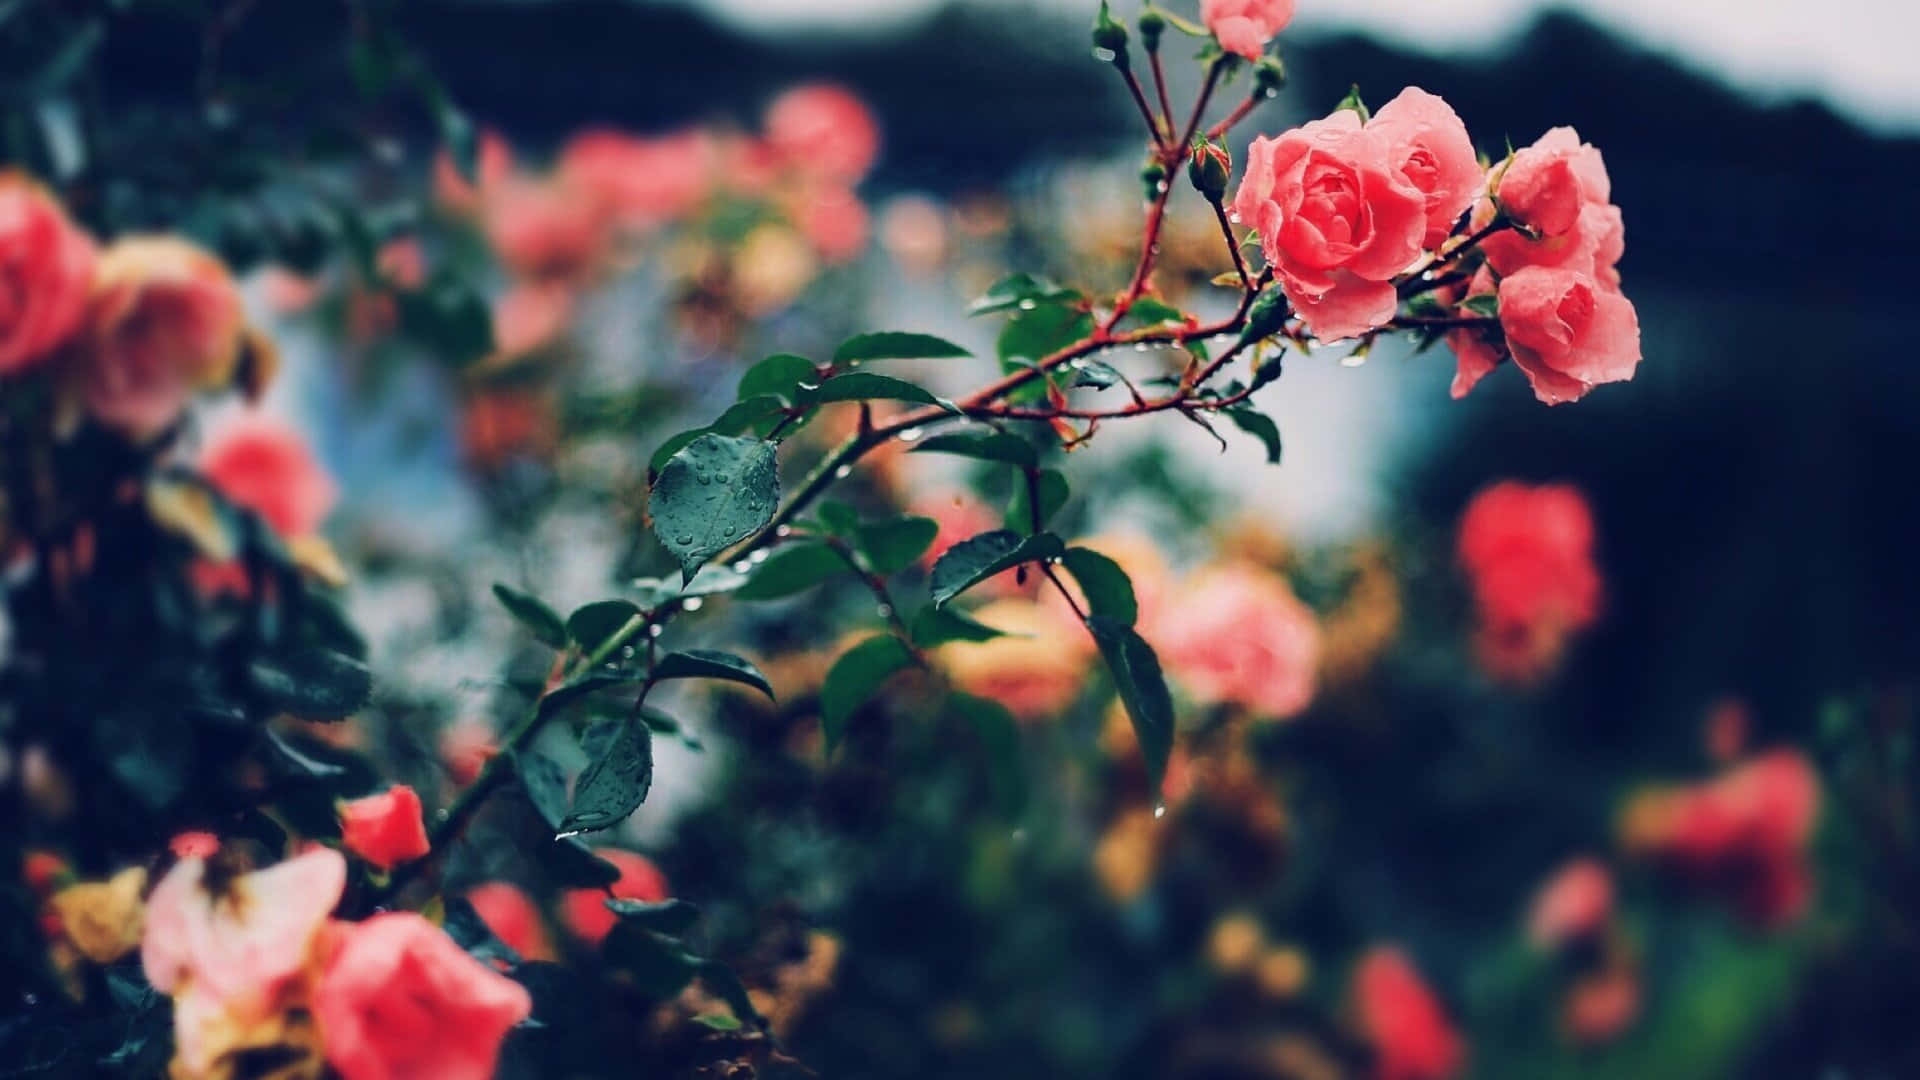 Download Aesthetic Rose 1920 X 1080 Background | Wallpapers.com